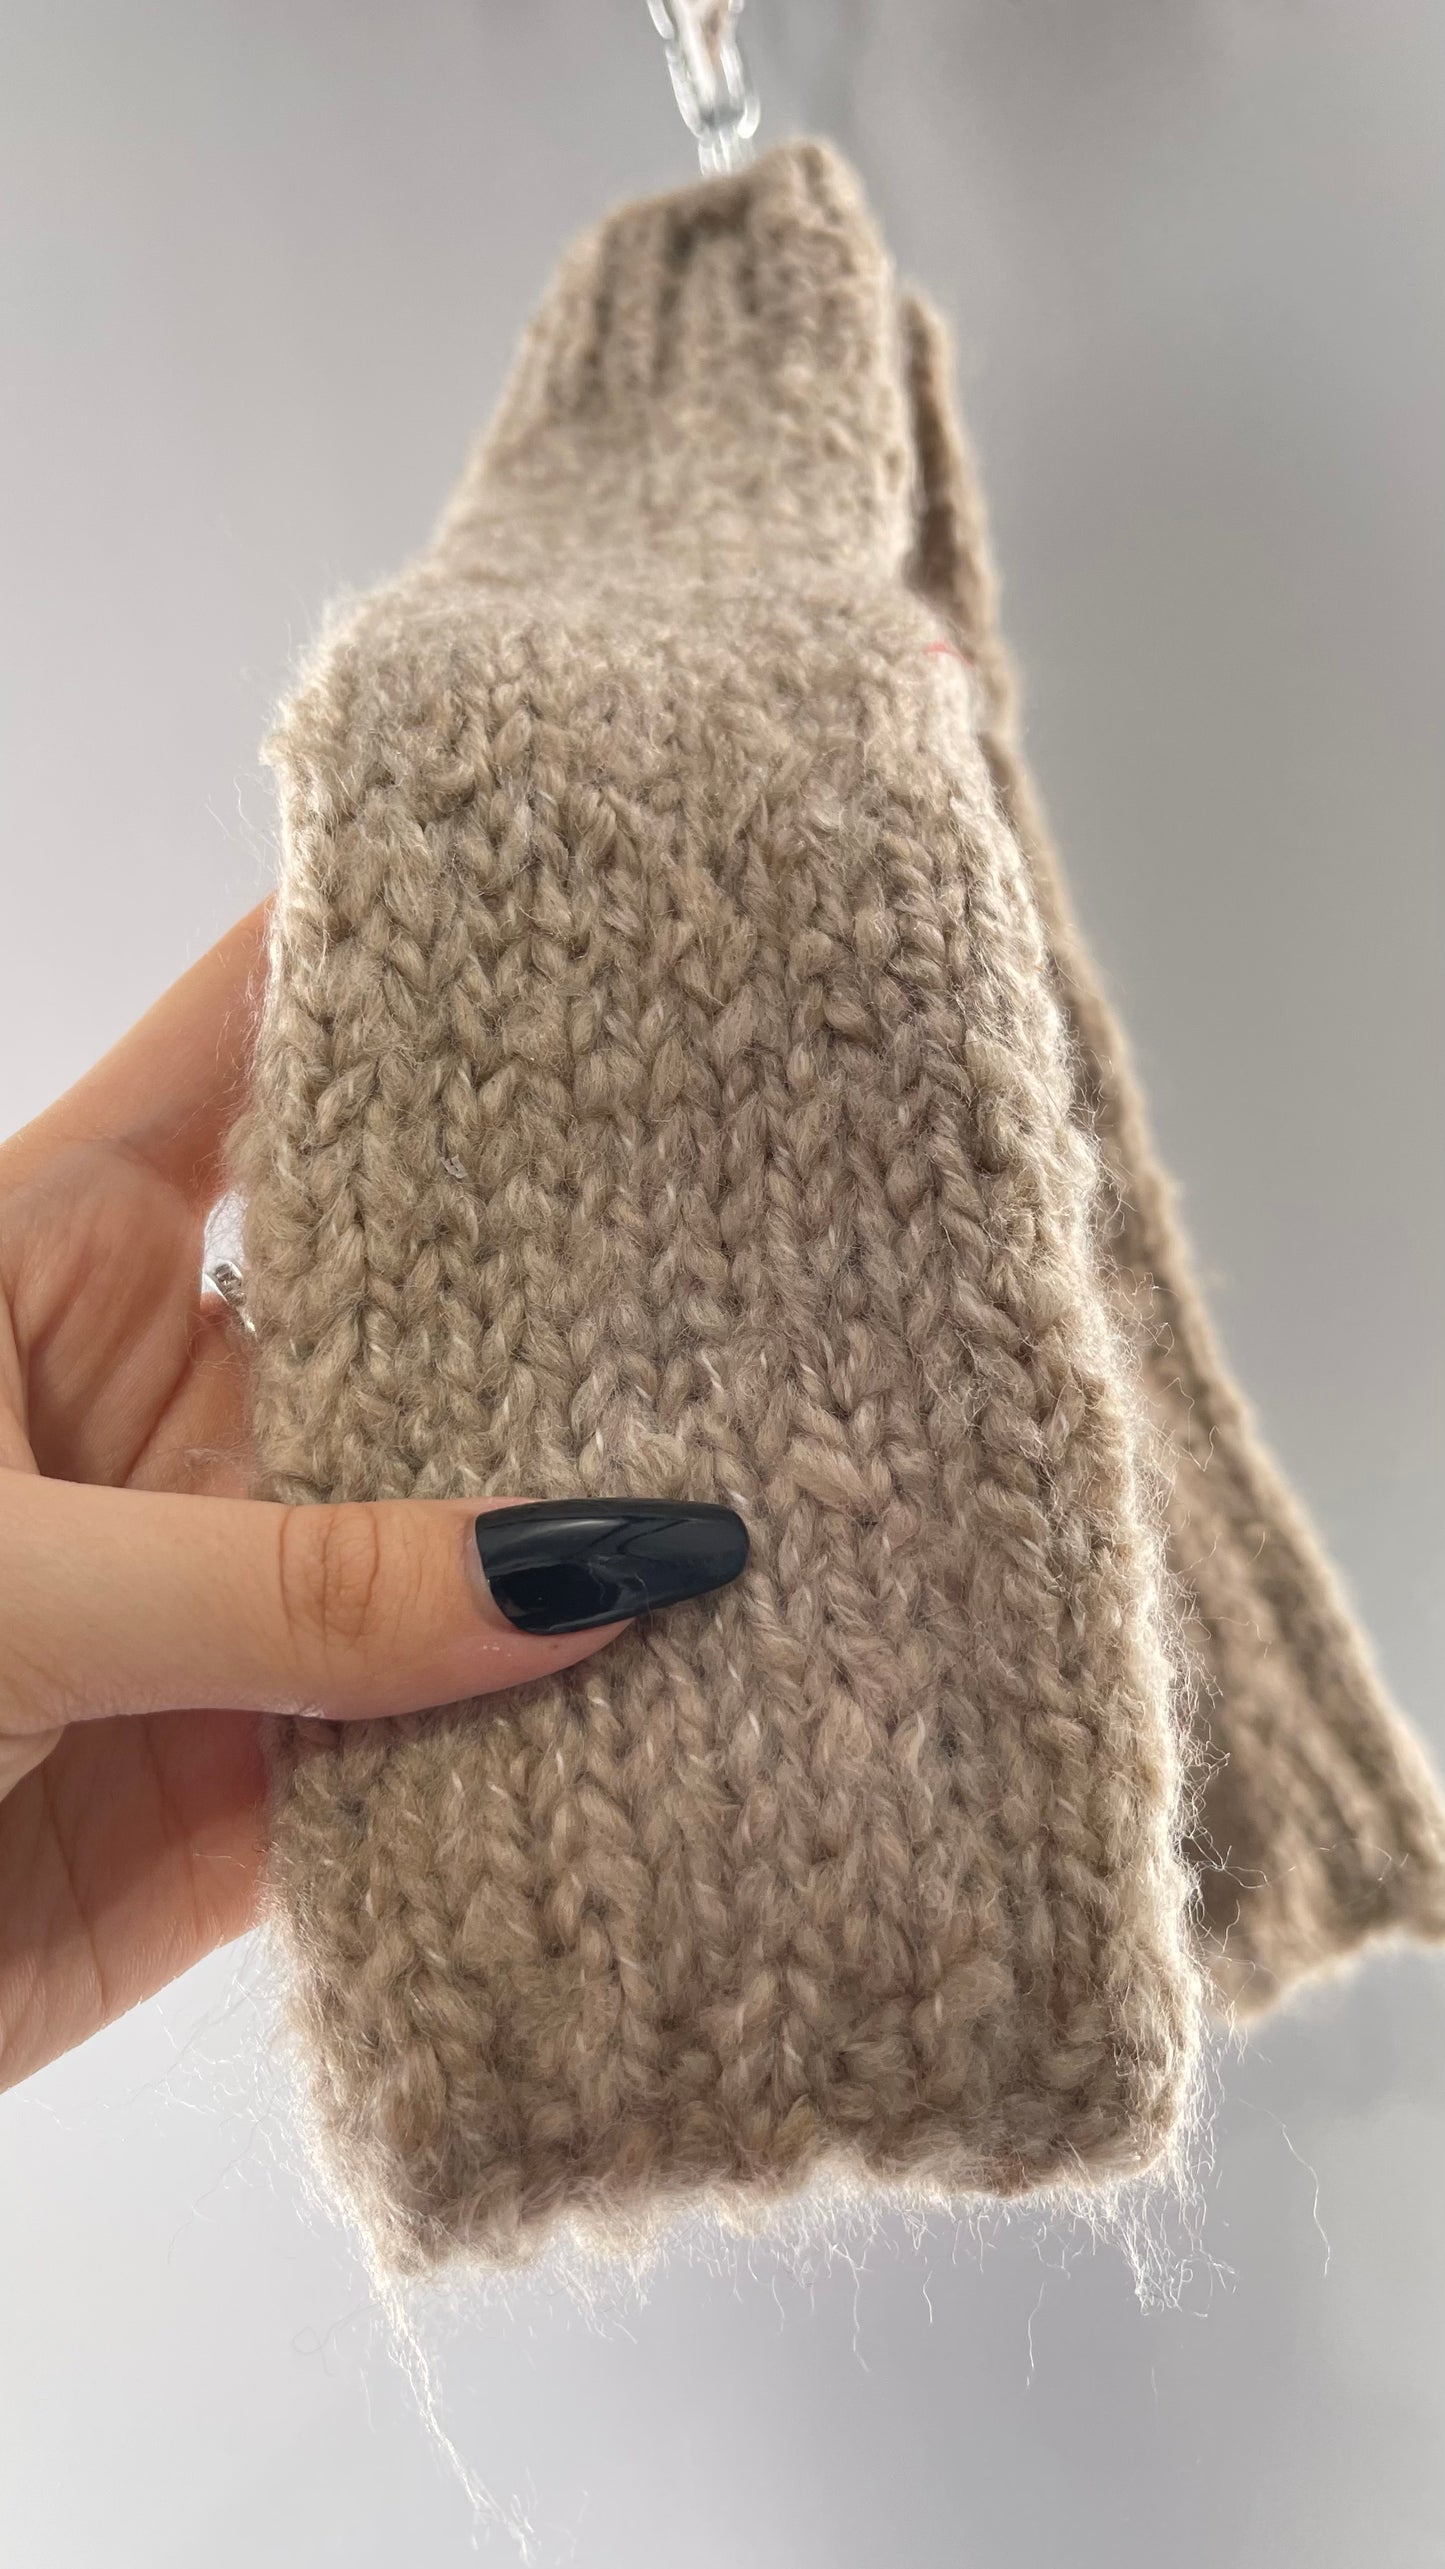 Urban Outfitters Beige/Oatmeal Knit Arm Warmer/Glove with Covered Palm, Thumb Hole